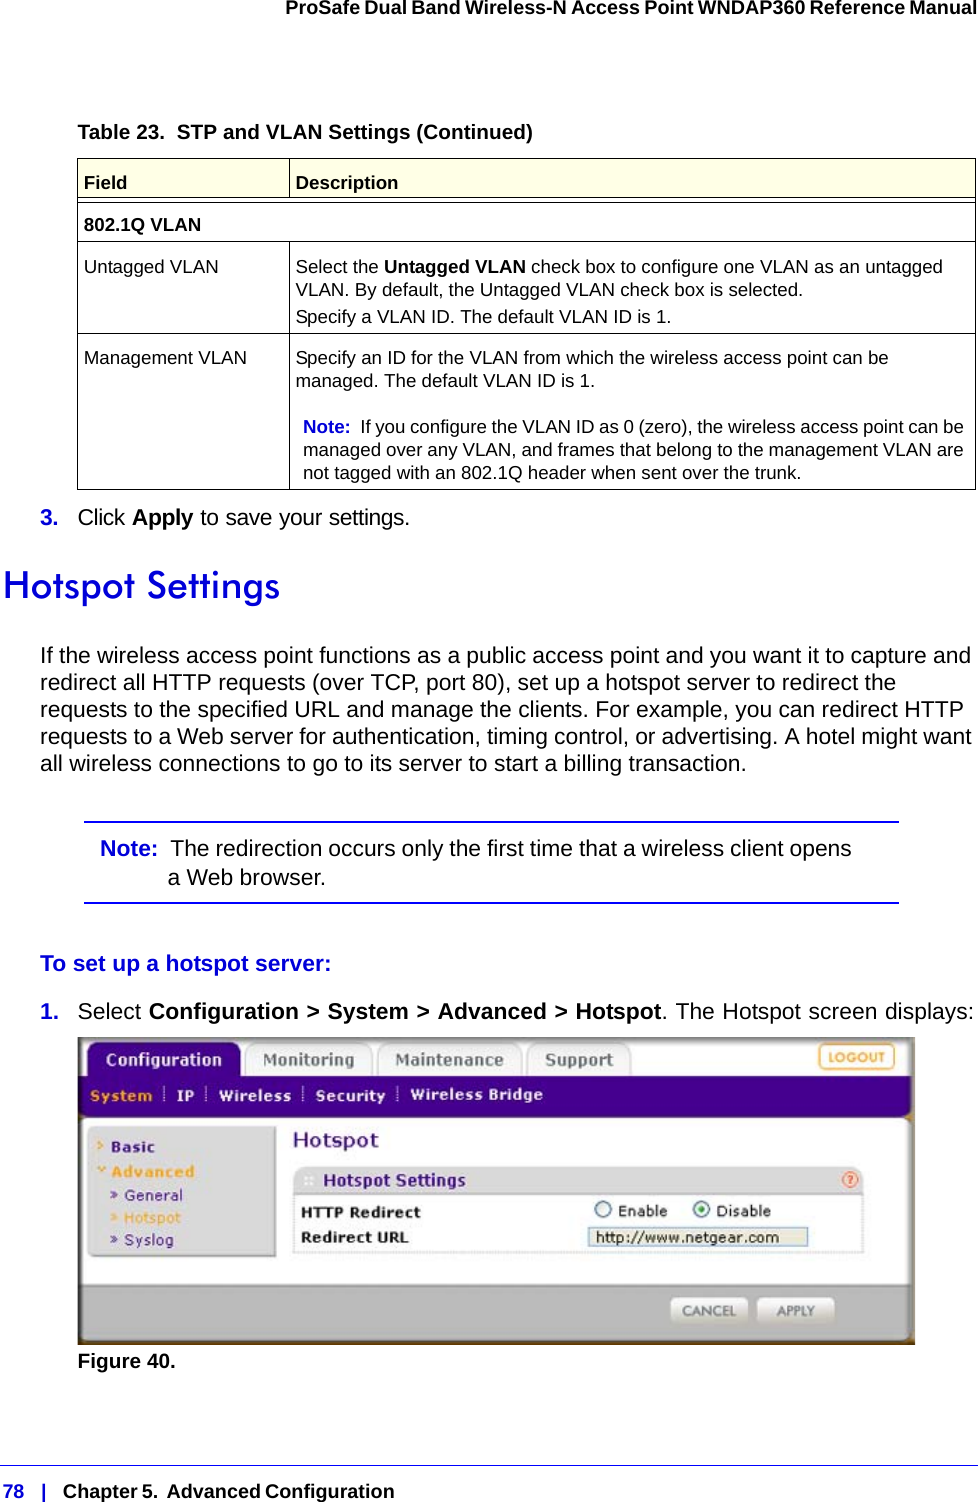 78   |   Chapter 5.  Advanced Configuration  ProSafe Dual Band Wireless-N Access Point WNDAP360 Reference Manual 3.  Click Apply to save your settings.Hotspot SettingsIf the wireless access point functions as a public access point and you want it to capture and redirect all HTTP requests (over TCP, port 80), set up a hotspot server to redirect the requests to the specified URL and manage the clients. For example, you can redirect HTTP requests to a Web server for authentication, timing control, or advertising. A hotel might want all wireless connections to go to its server to start a billing transaction.Note:  The redirection occurs only the first time that a wireless client opens a Web browser.To set up a hotspot server:1.  Select Configuration &gt; System &gt; Advanced &gt; Hotspot. The Hotspot screen displays:Figure 40.  802.1Q VLANUntagged VLAN Select the Untagged VLAN check box to configure one VLAN as an untagged VLAN. By default, the Untagged VLAN check box is selected.Specify a VLAN ID. The default VLAN ID is 1.Management VLAN Specify an ID for the VLAN from which the wireless access point can be managed. The default VLAN ID is 1. Note: If you configure the VLAN ID as 0 (zero), the wireless access point can be managed over any VLAN, and frames that belong to the management VLAN are not tagged with an 802.1Q header when sent over the trunk.Table 23.  STP and VLAN Settings (Continued)Field  Description